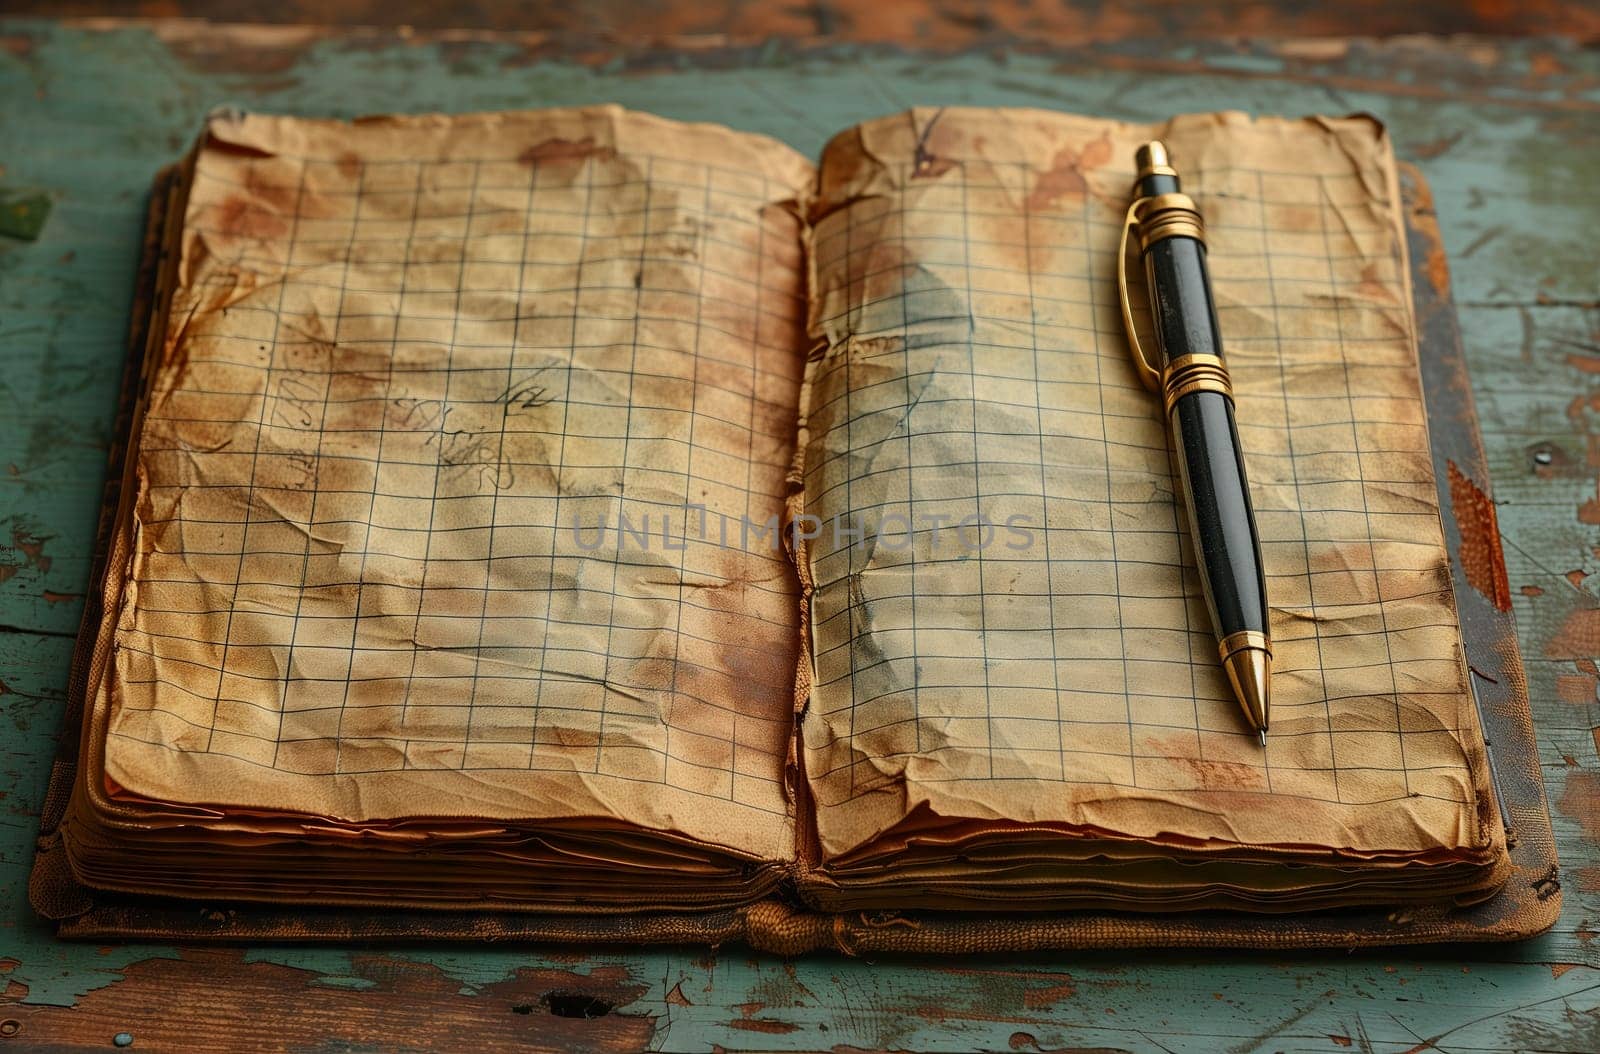 A wooden pen is resting on an open rectangular recipe book filled with delicious cuisine dishes, ingredients, and food fonts